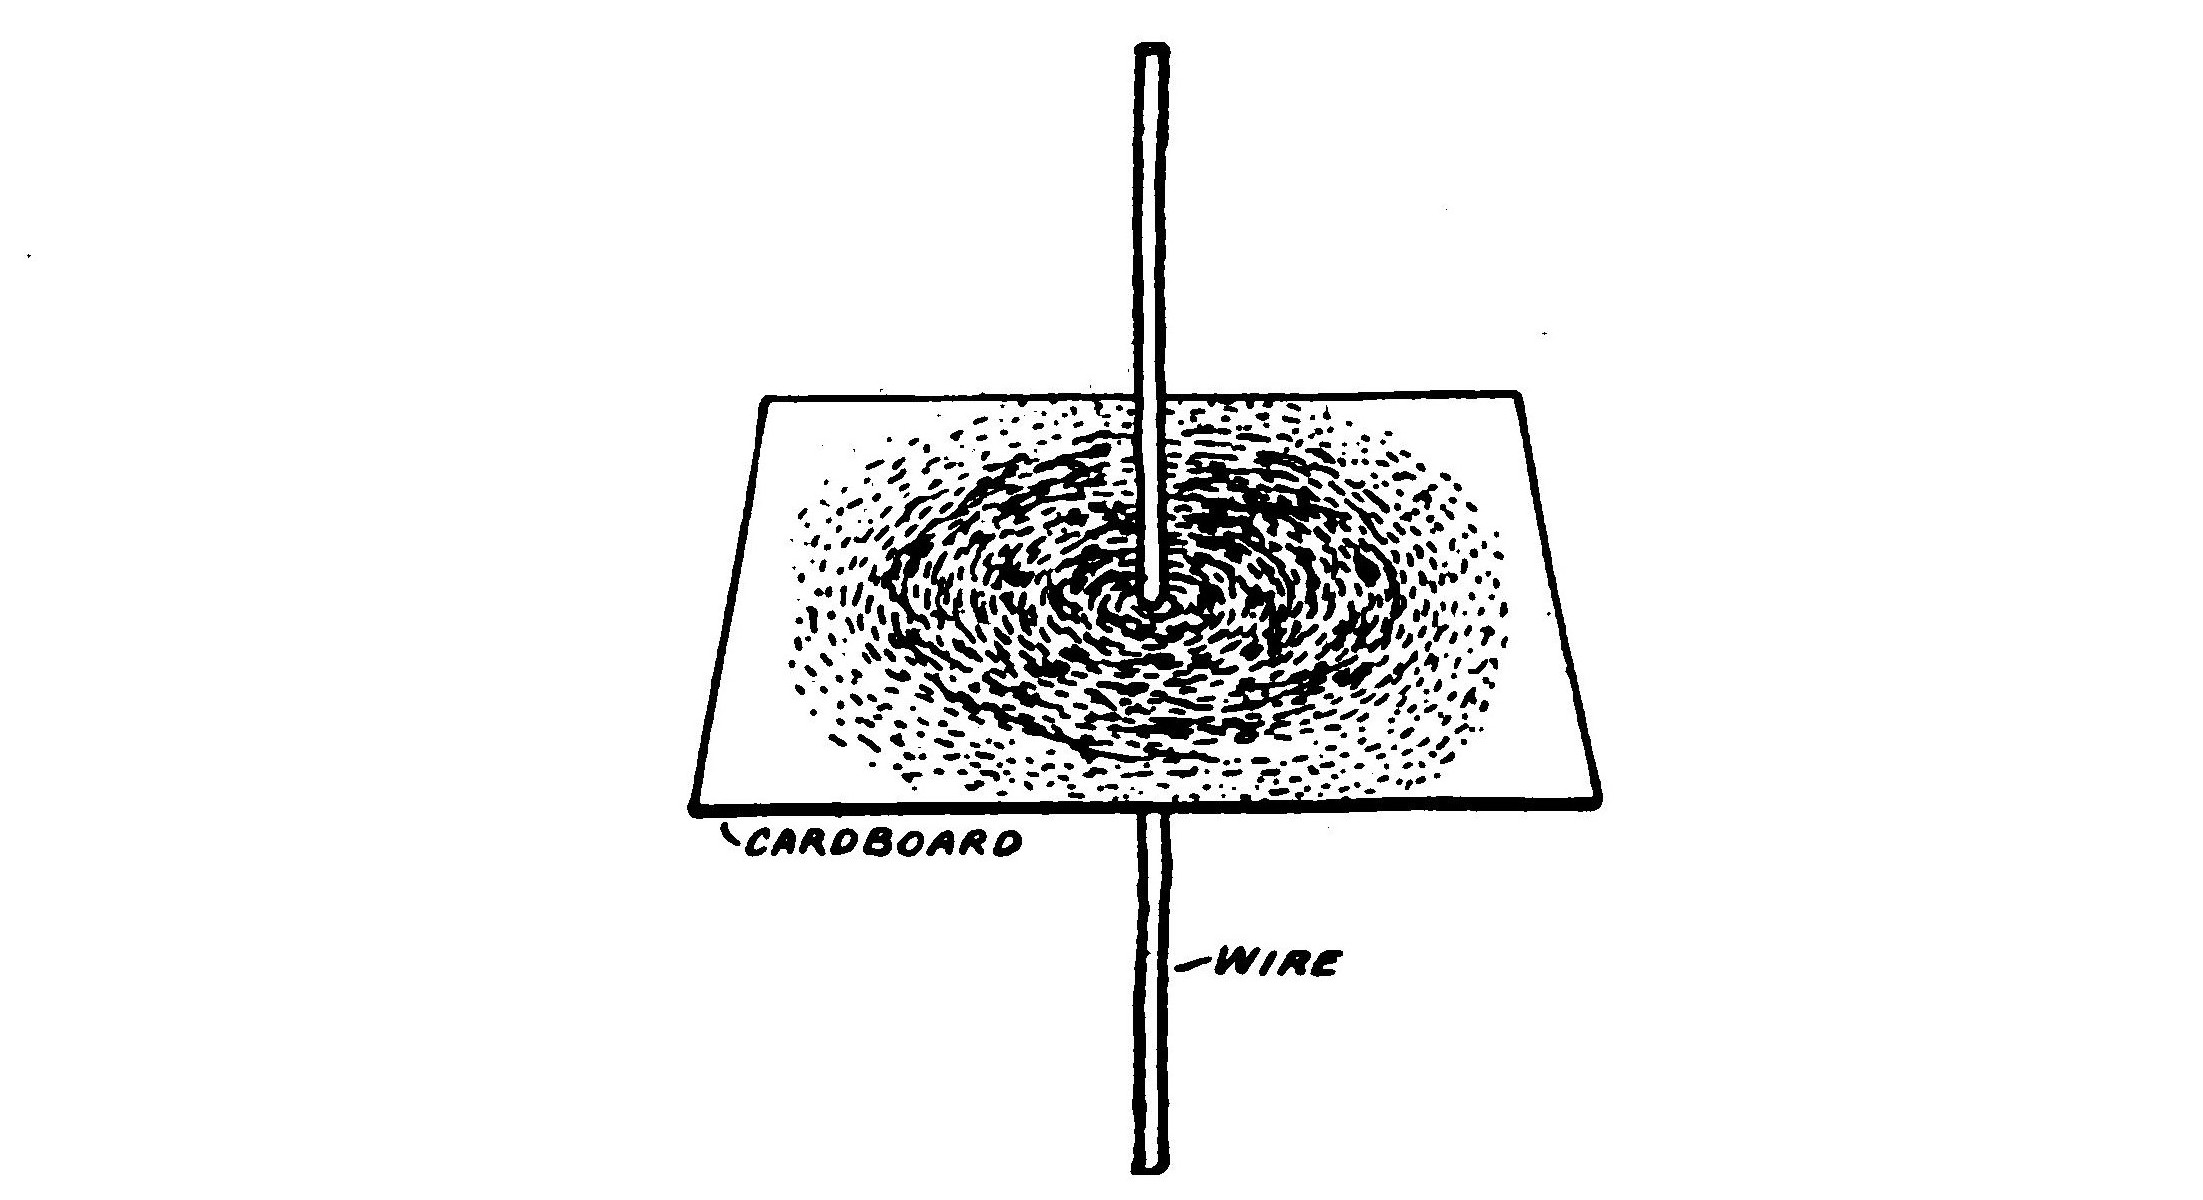 FIG. 32.—Magnetic phantom formed by wire carrying current.